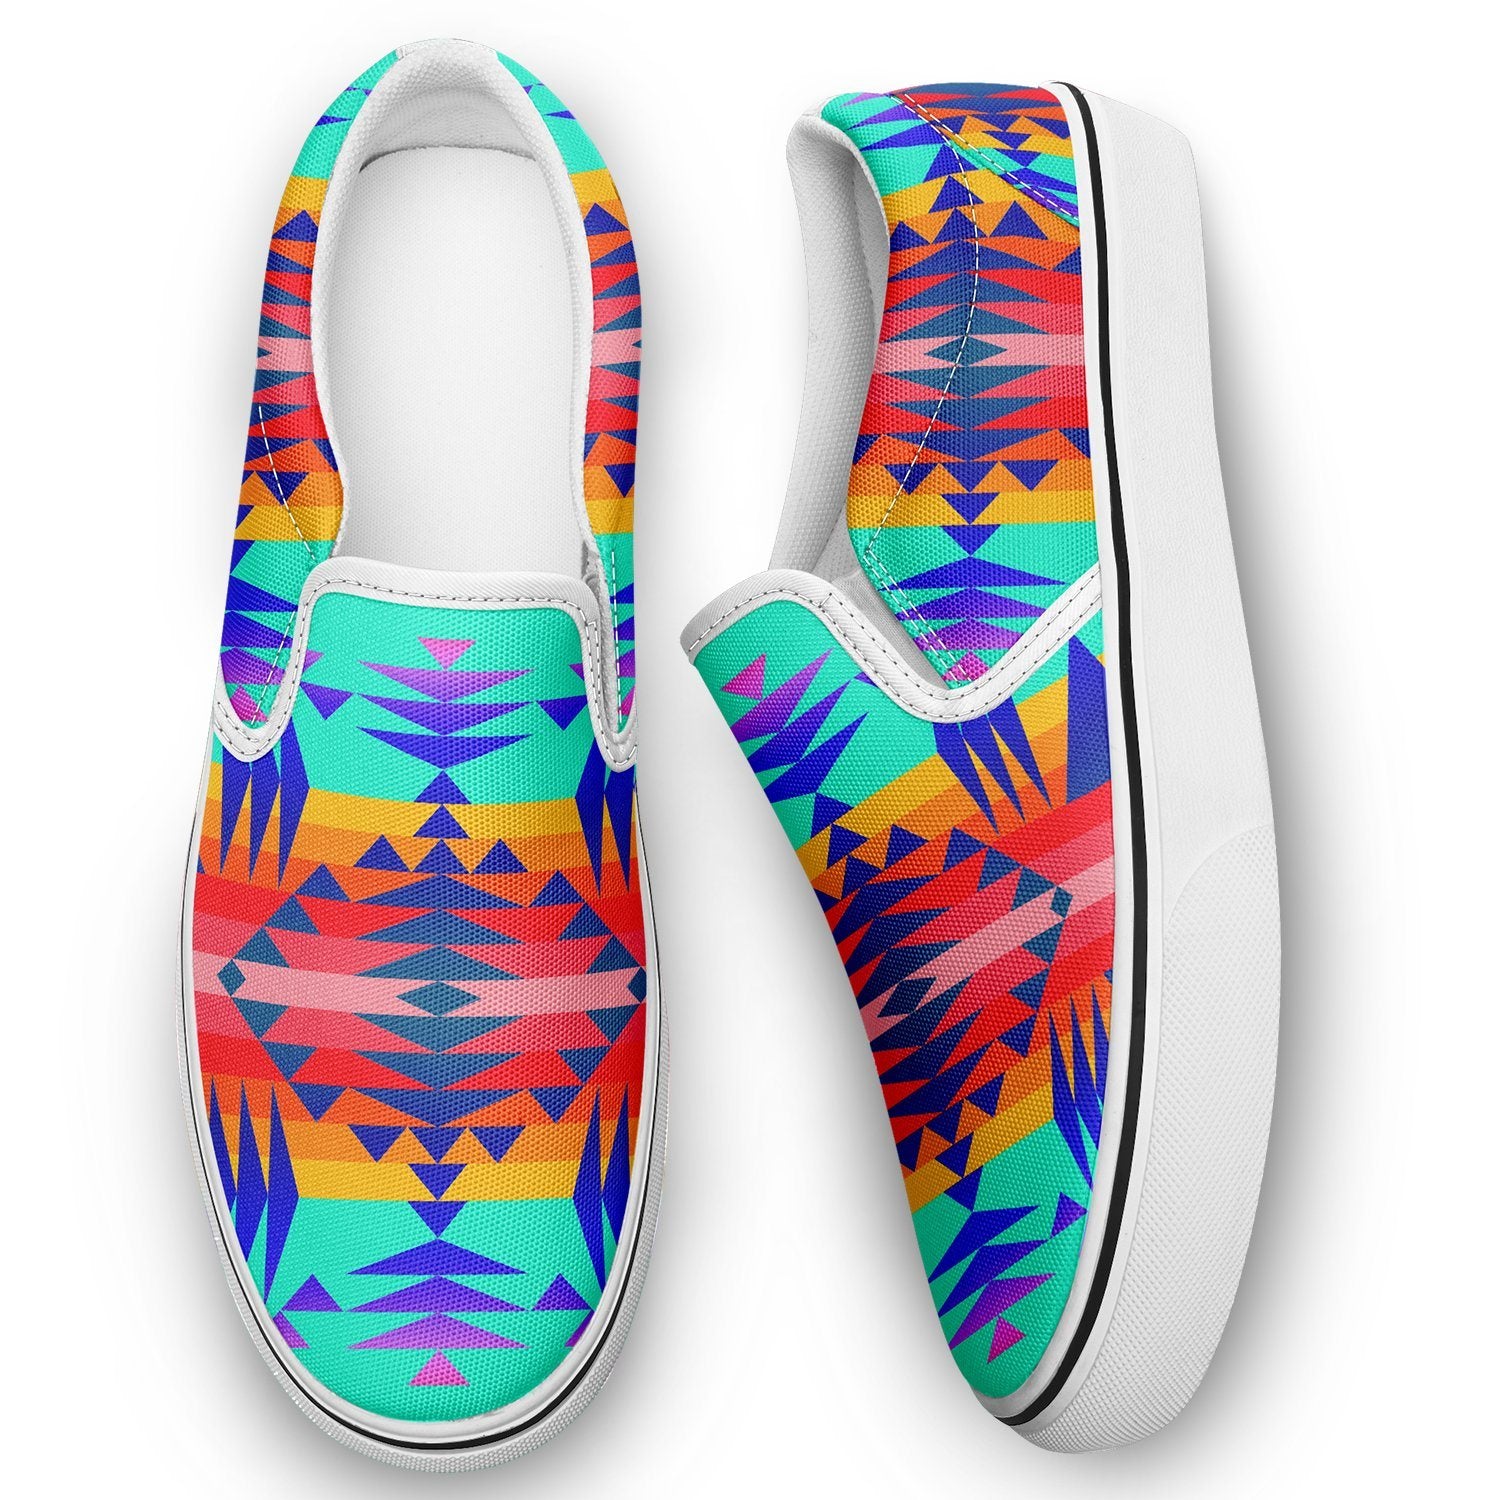 Between the Mountains Spring Otoyimm Canvas Slip On Shoes 49 Dzine 